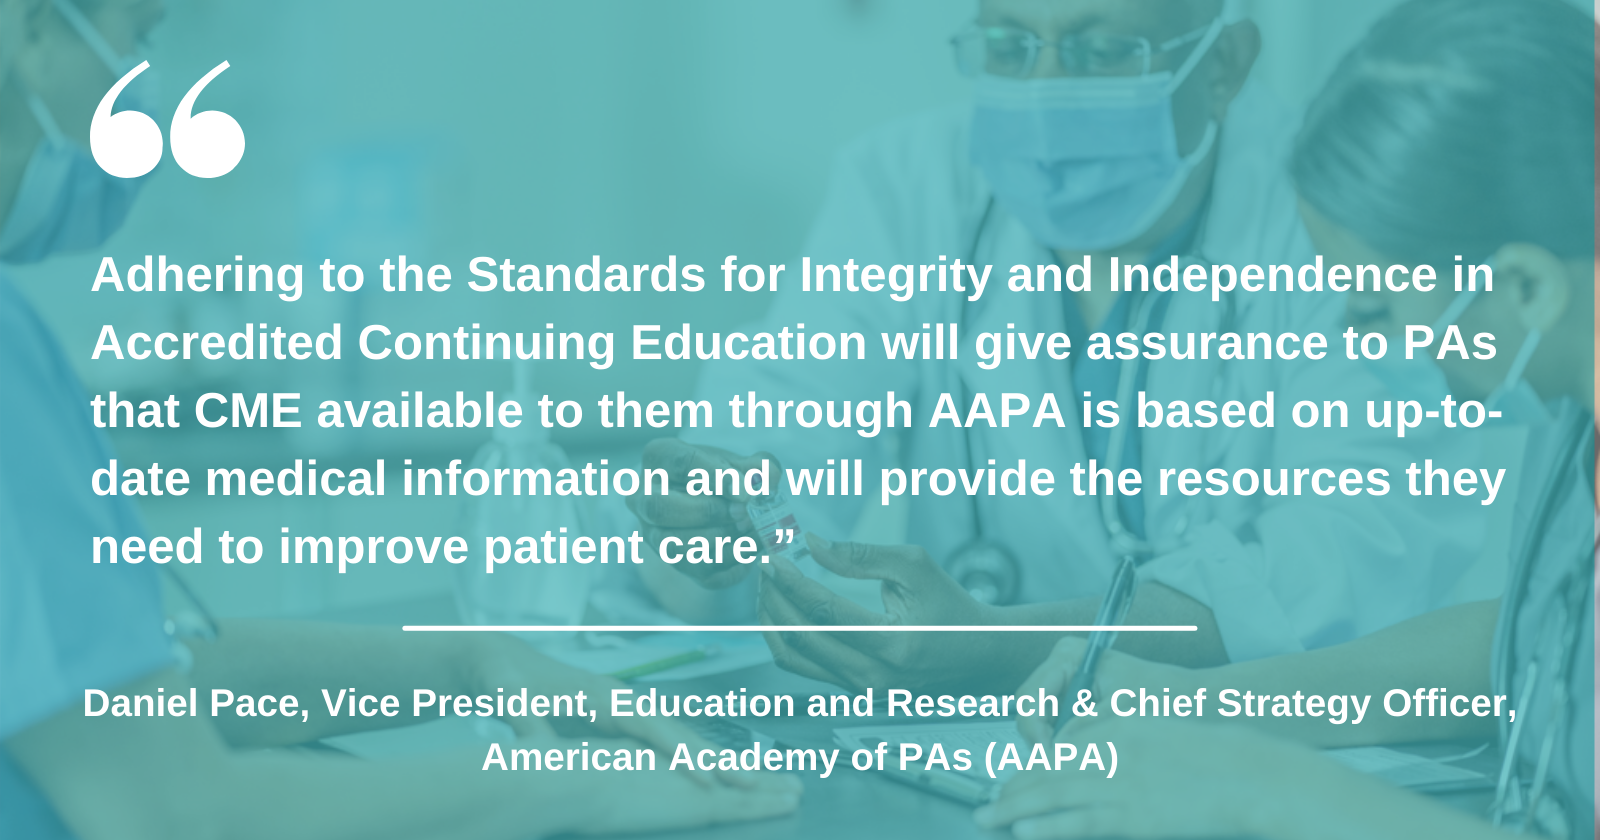 AAPA Adopts Standards for Integrity and Independence in Accredited